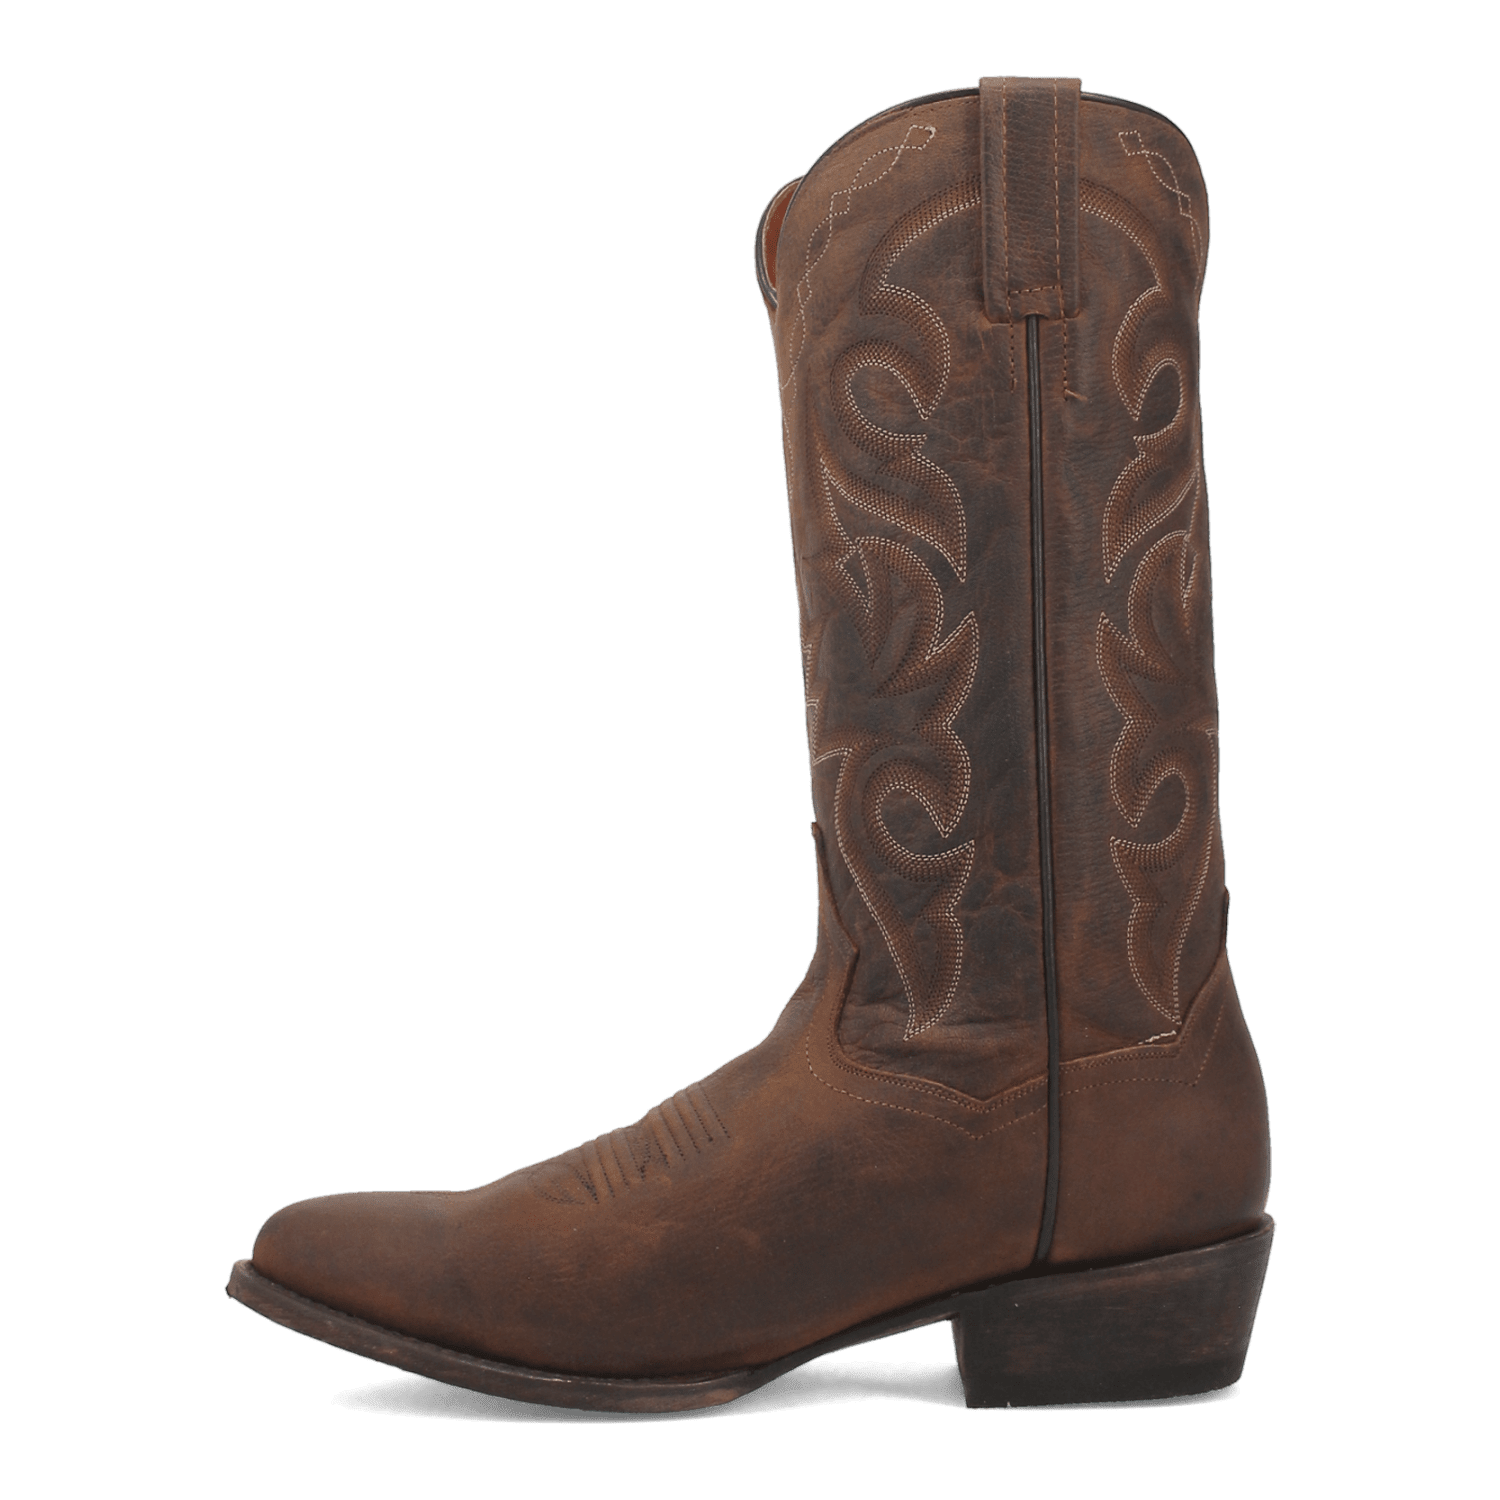 RENEGADE LEATHER BOOT Image